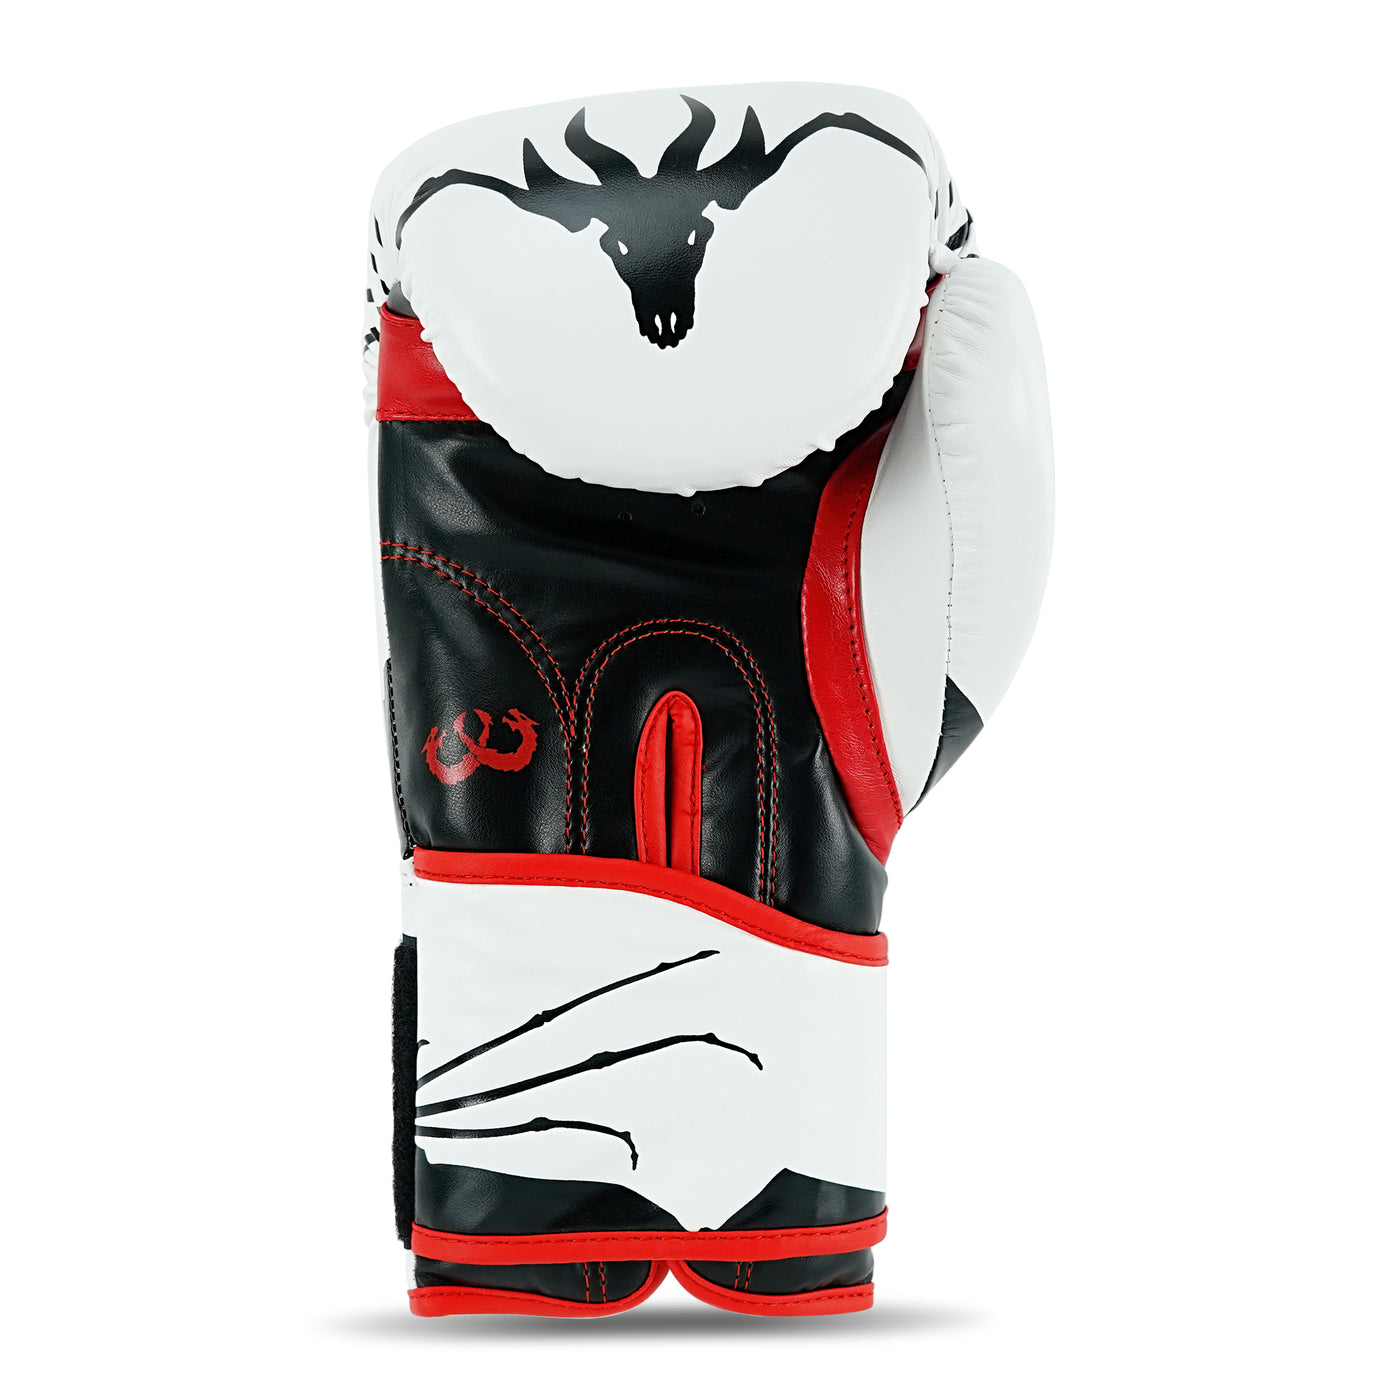 Spider White/Red/Black Leather Boxing Gloves